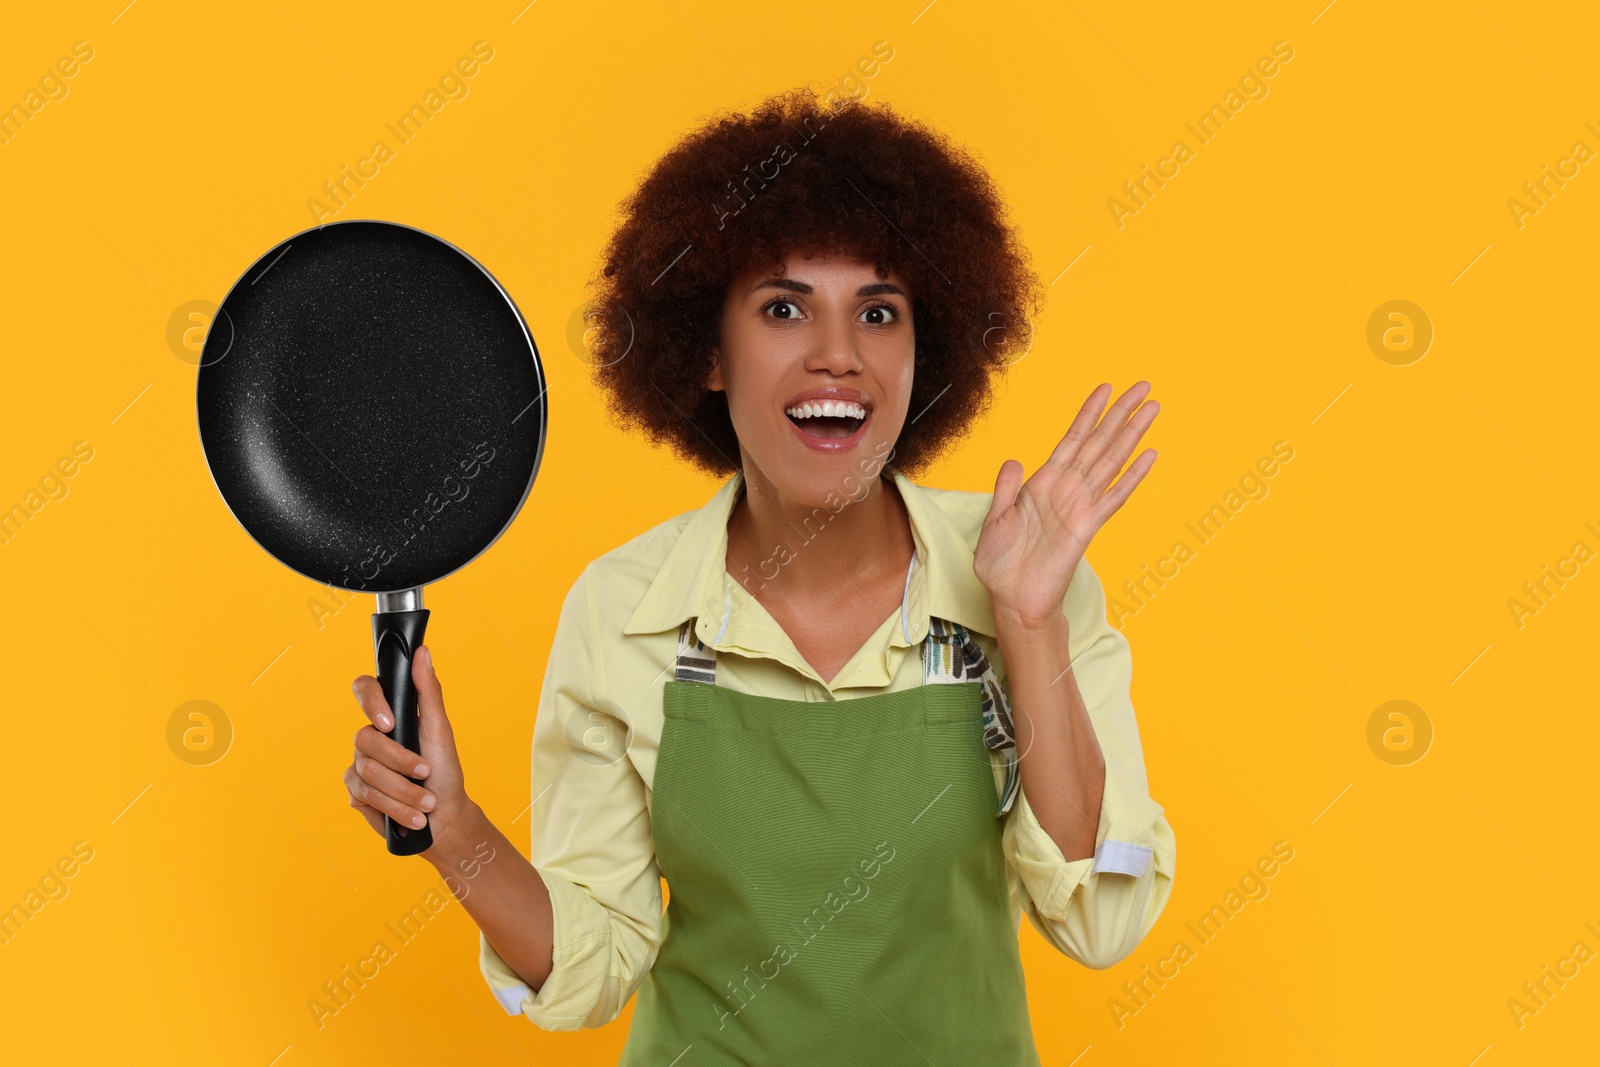 Photo of Emotional young woman in apron holding frying pan on orange background